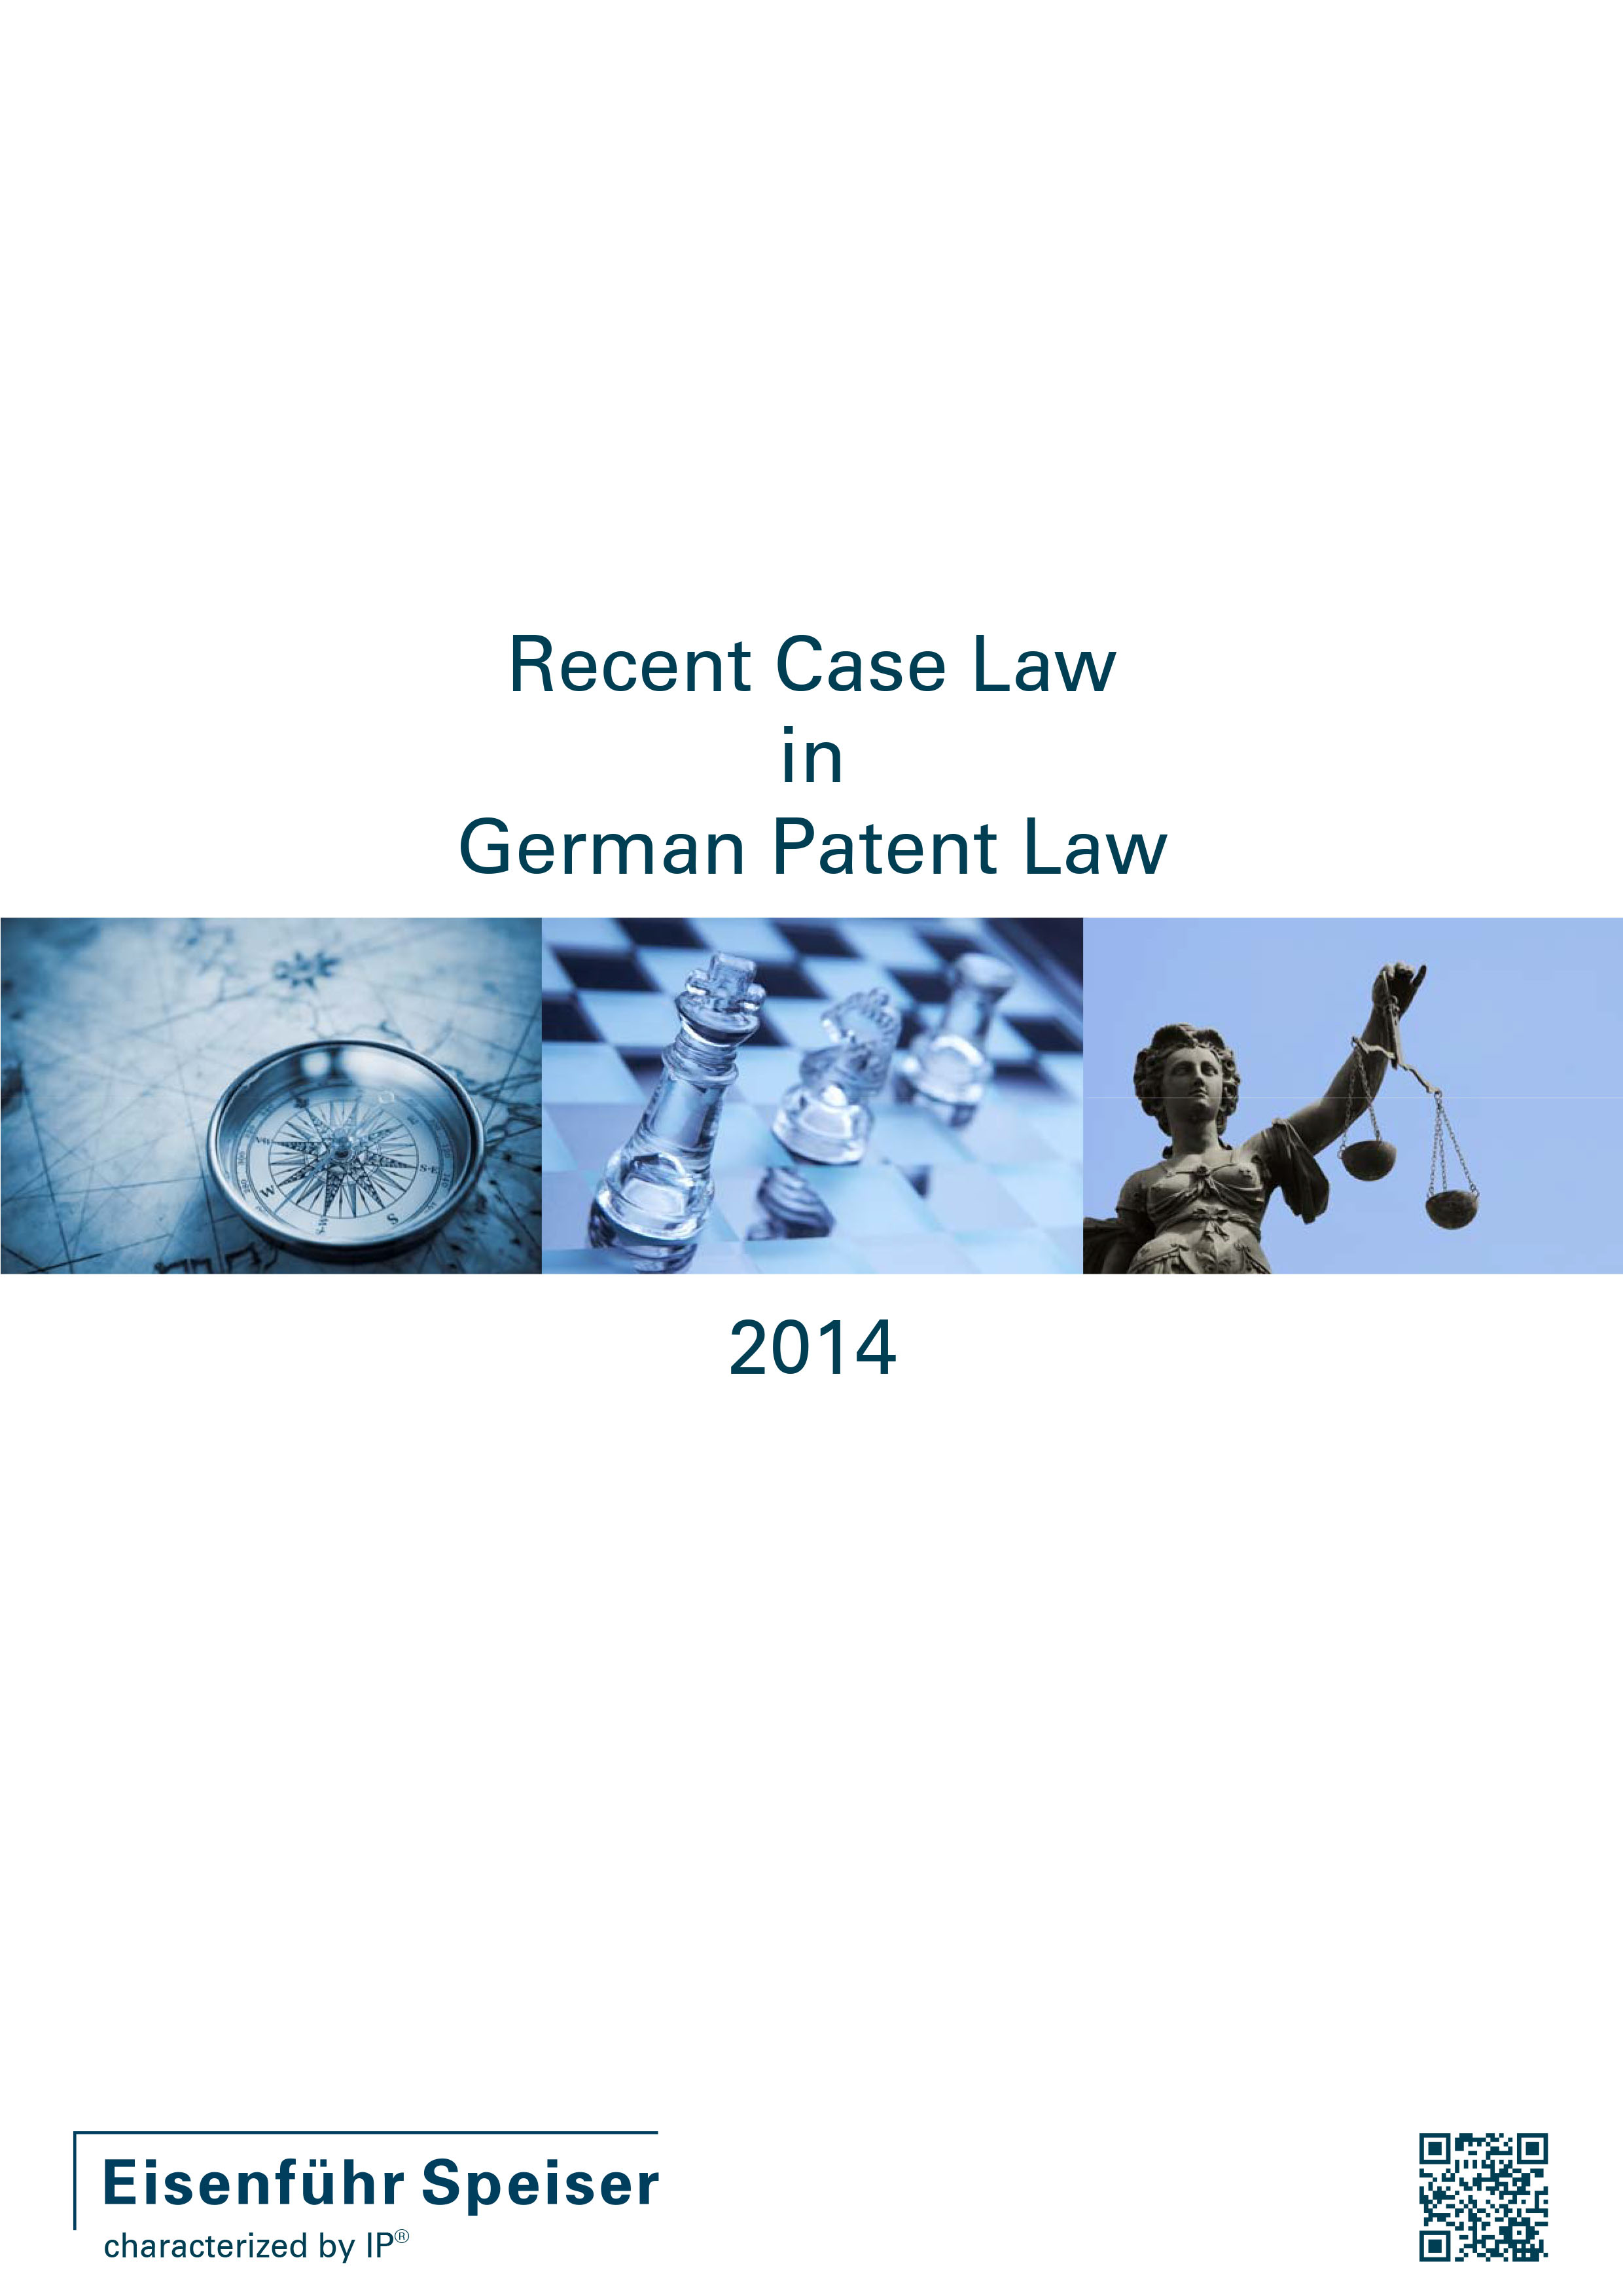 Recent Case Law in German Patent Law 2014